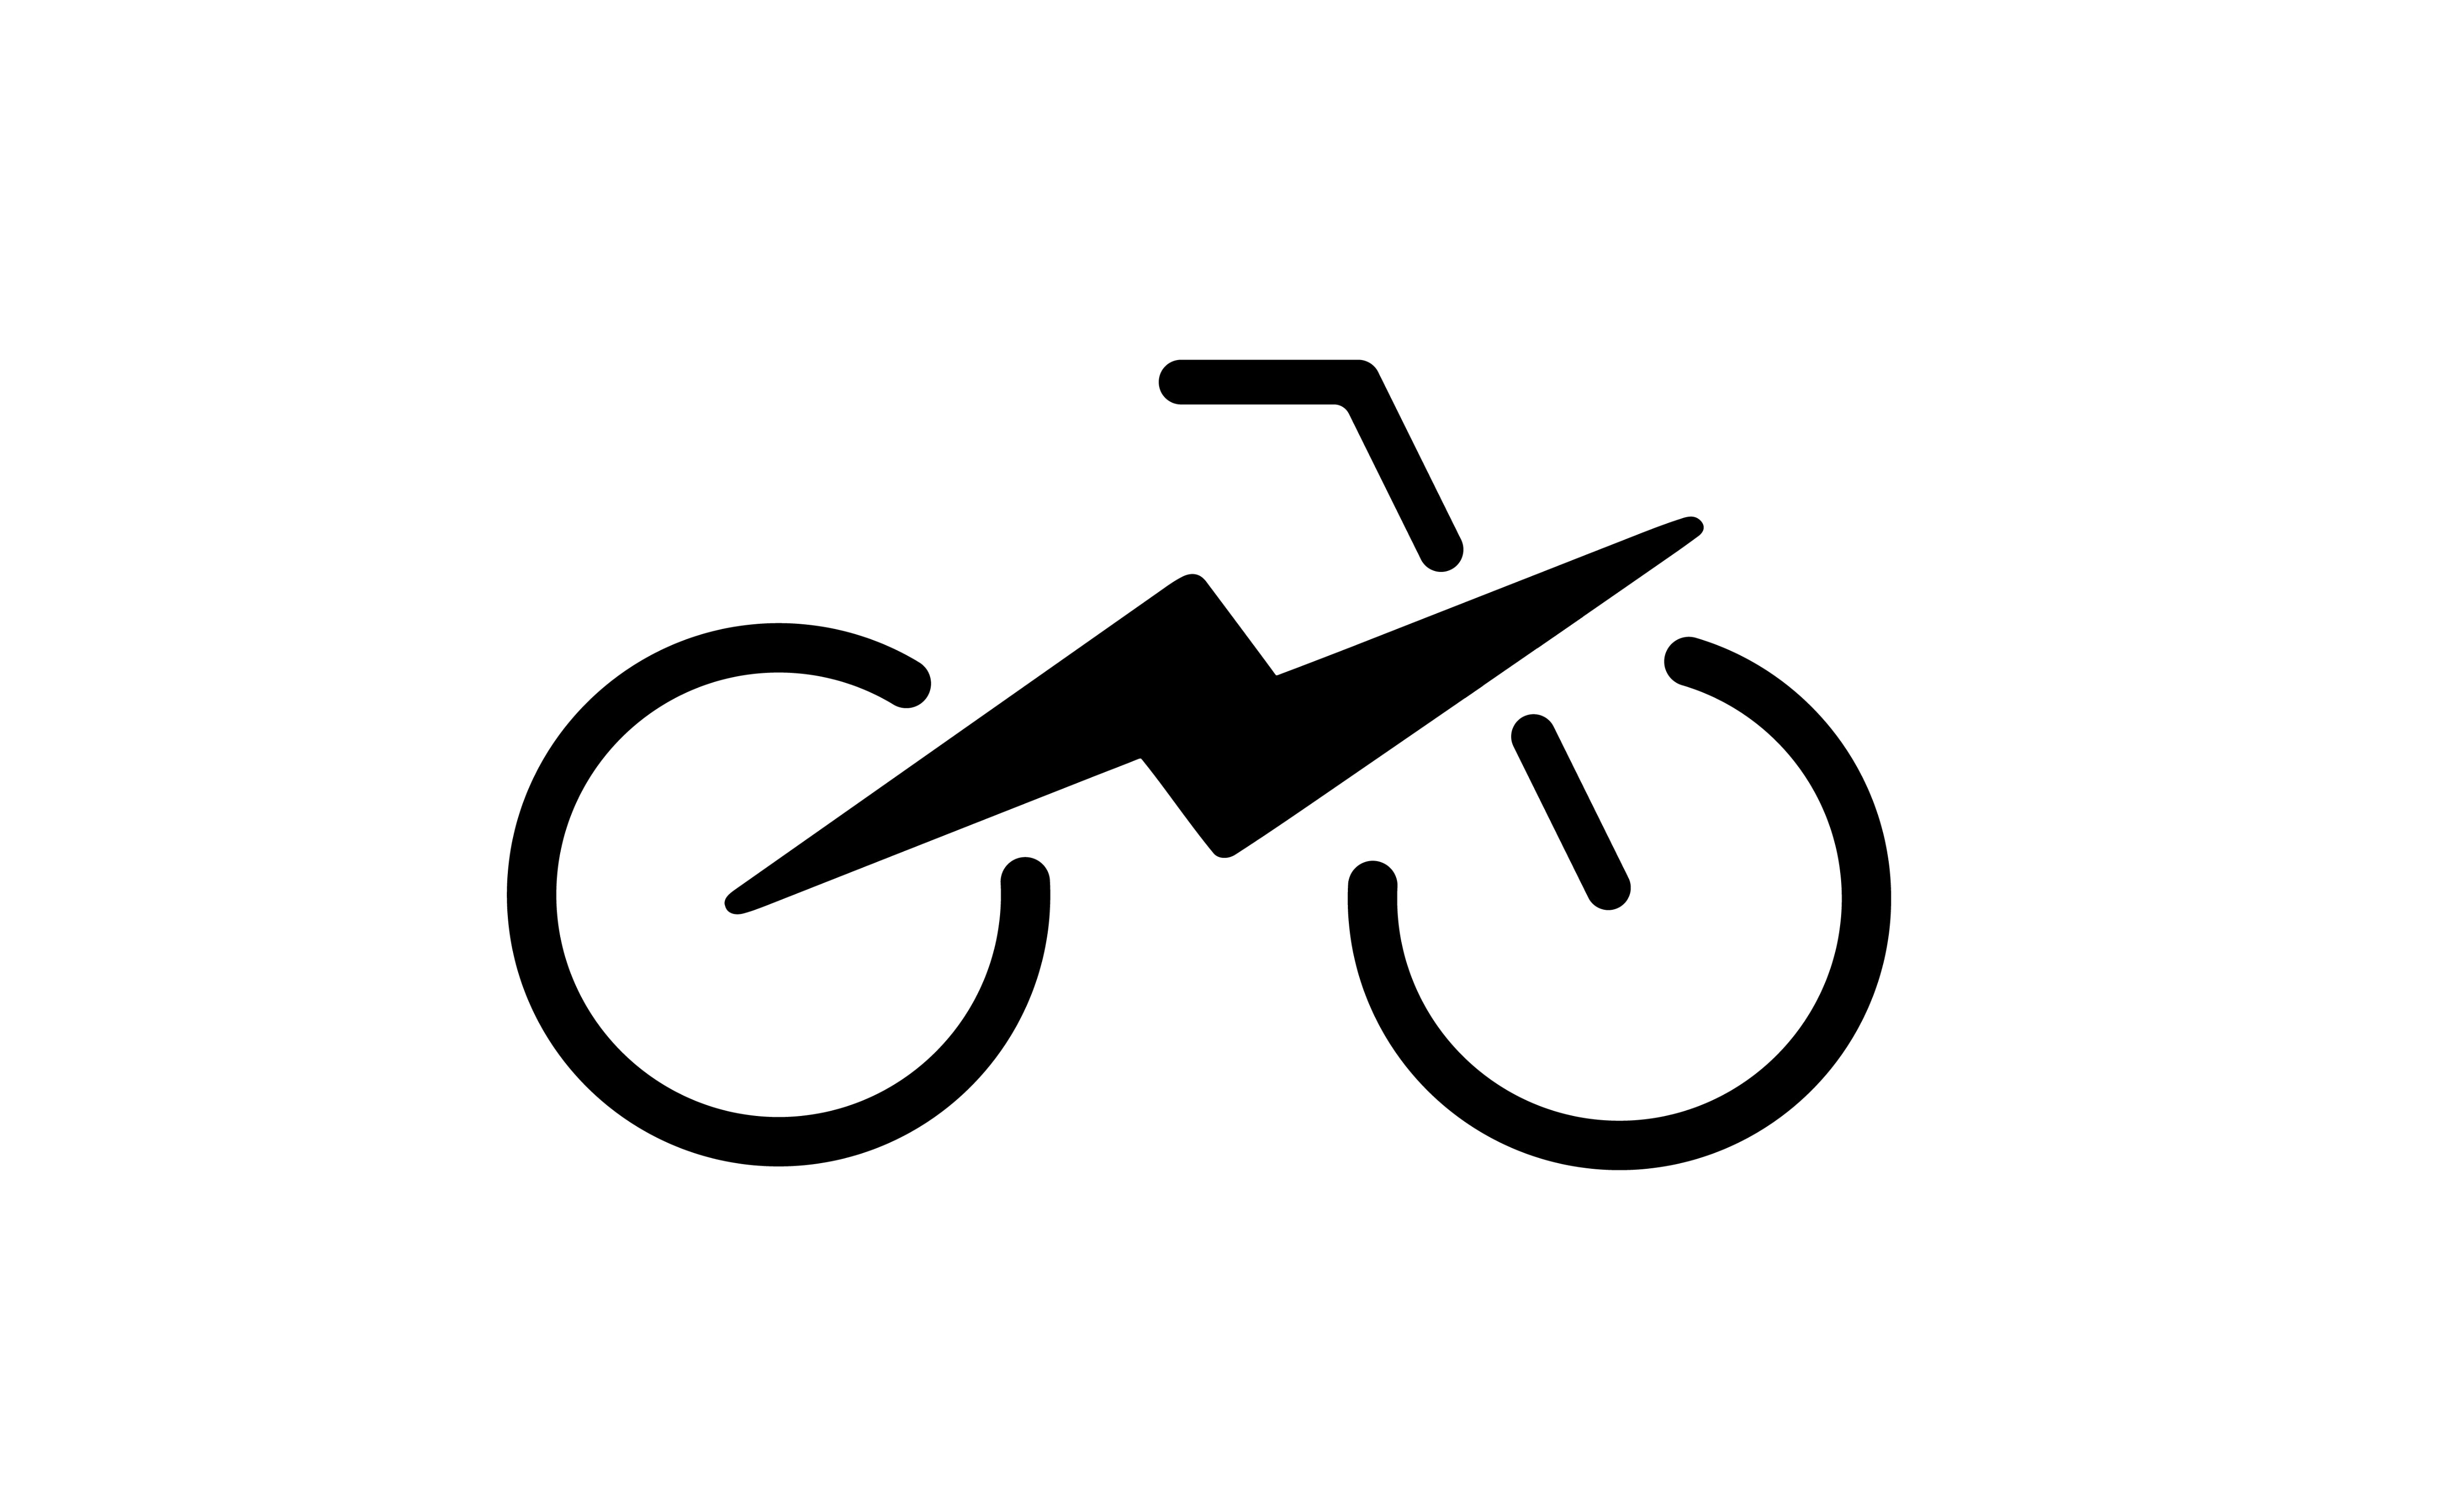 www.electricbikesdelivered.com